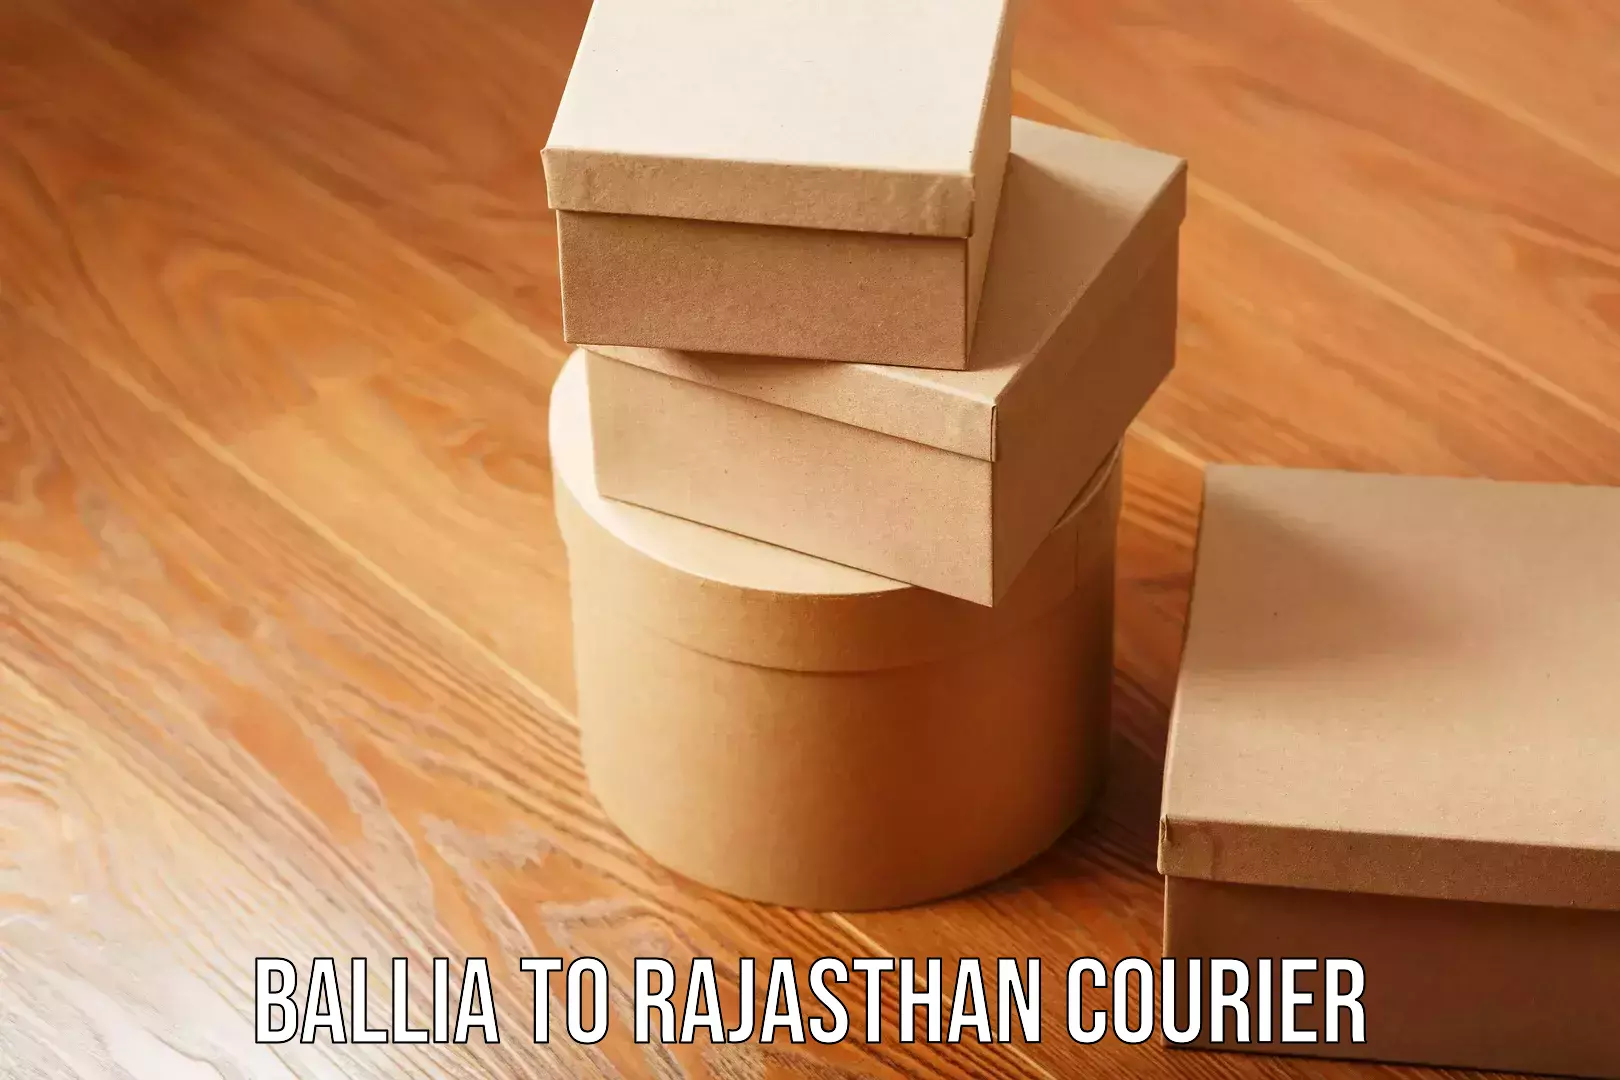 Trackable shipping service Ballia to Rajasthan